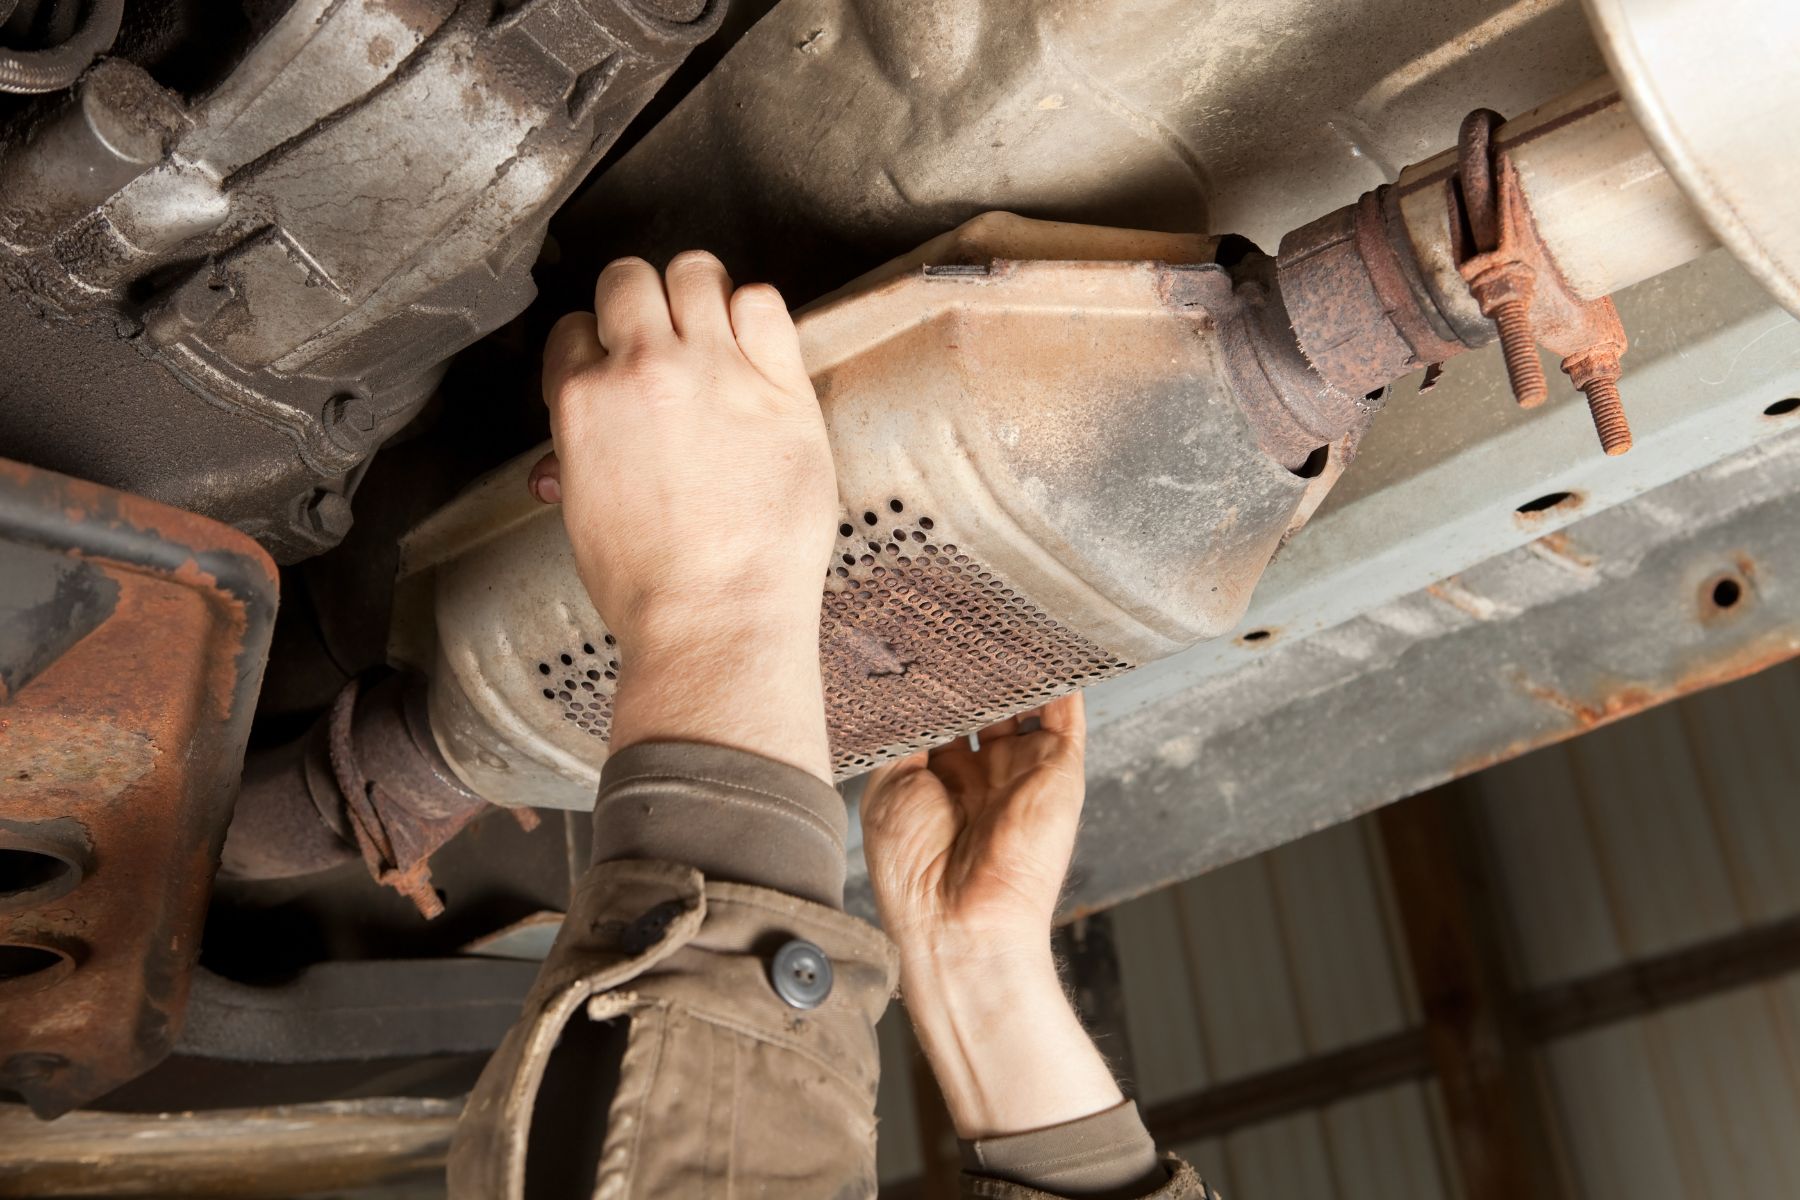 a persons hands on a cars muffler to get the catalytic converter. catalytic converter theft